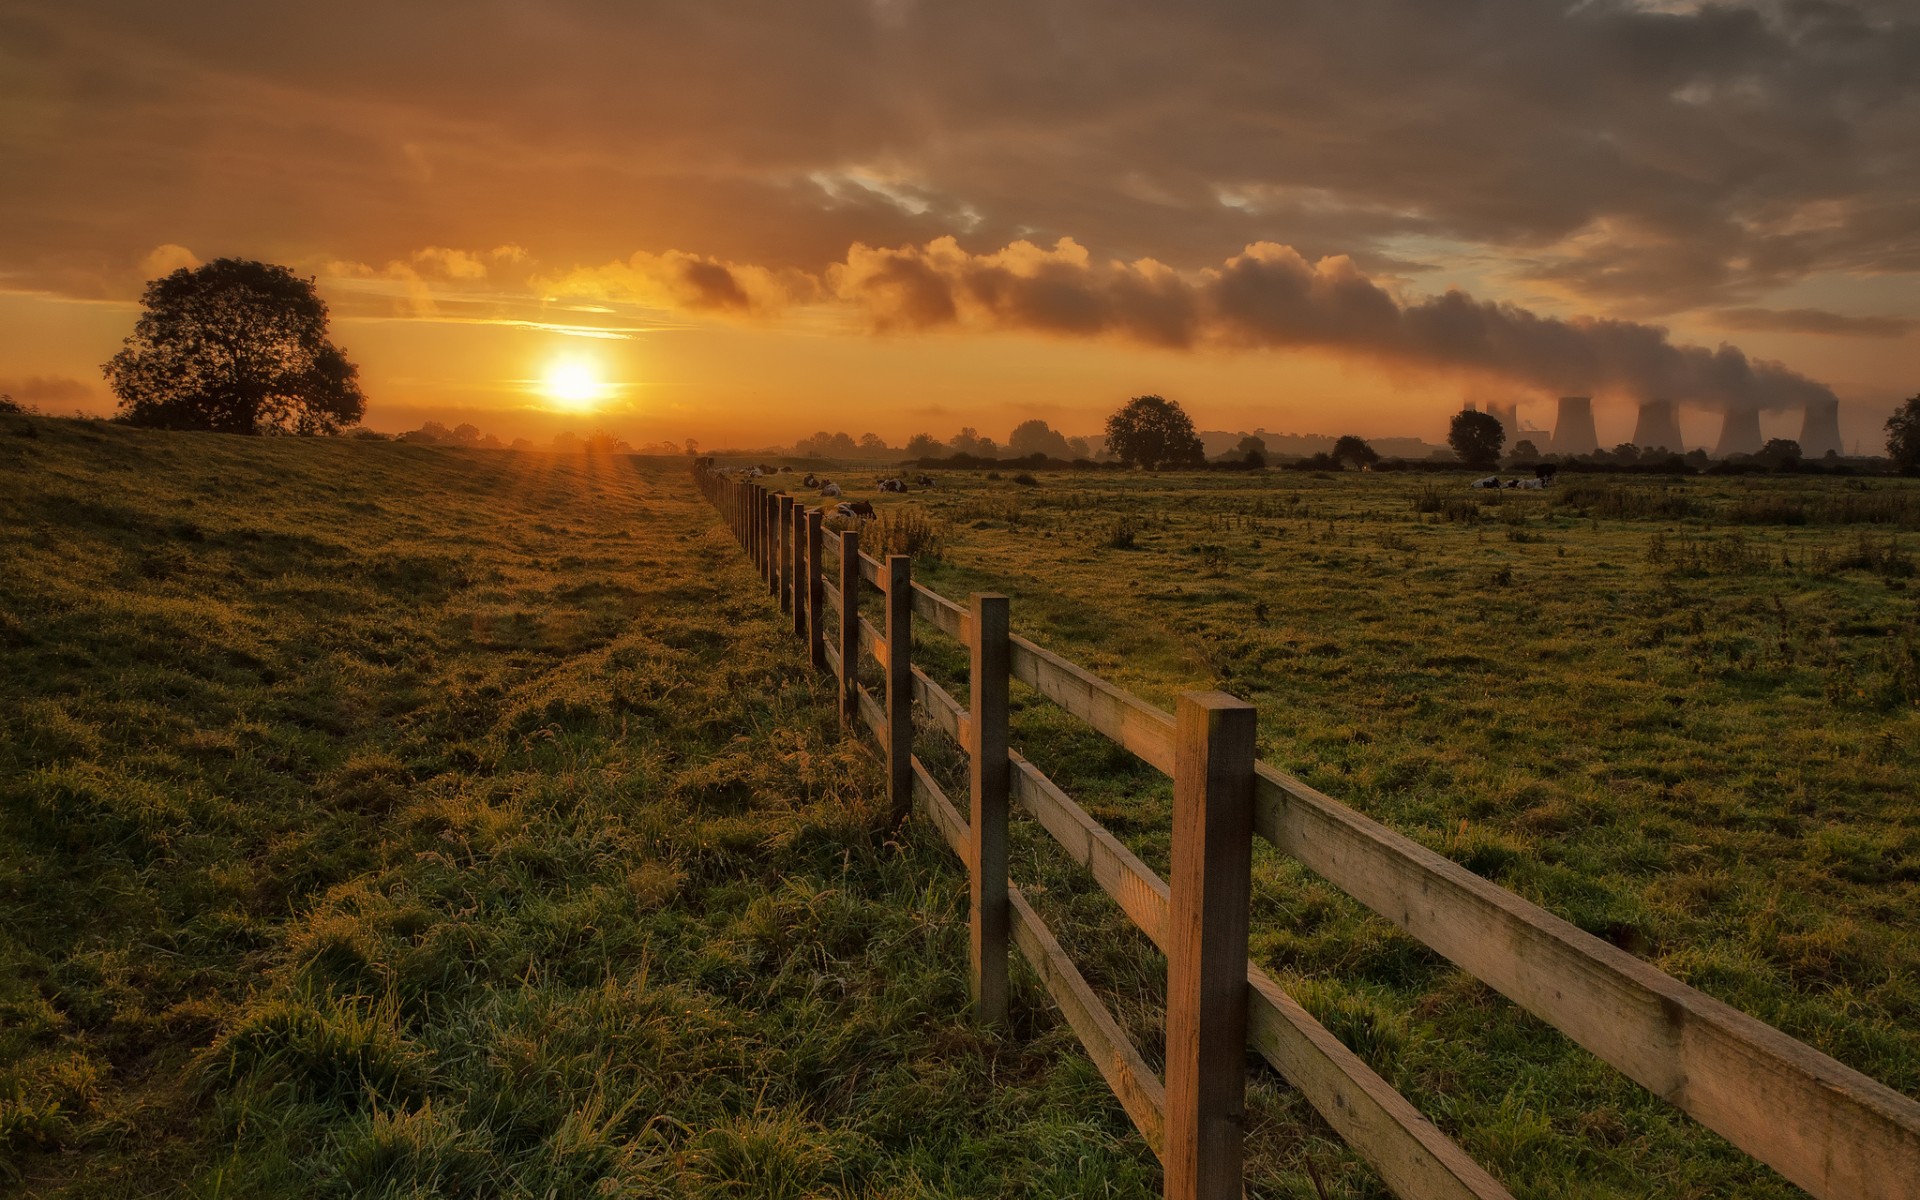 corral, Fence, Fencing, Cows, Grass, Trees, Sun, Evening, Sunset, Sky, Clouds, Nuclear, Radiation, Landscapes Wallpaper